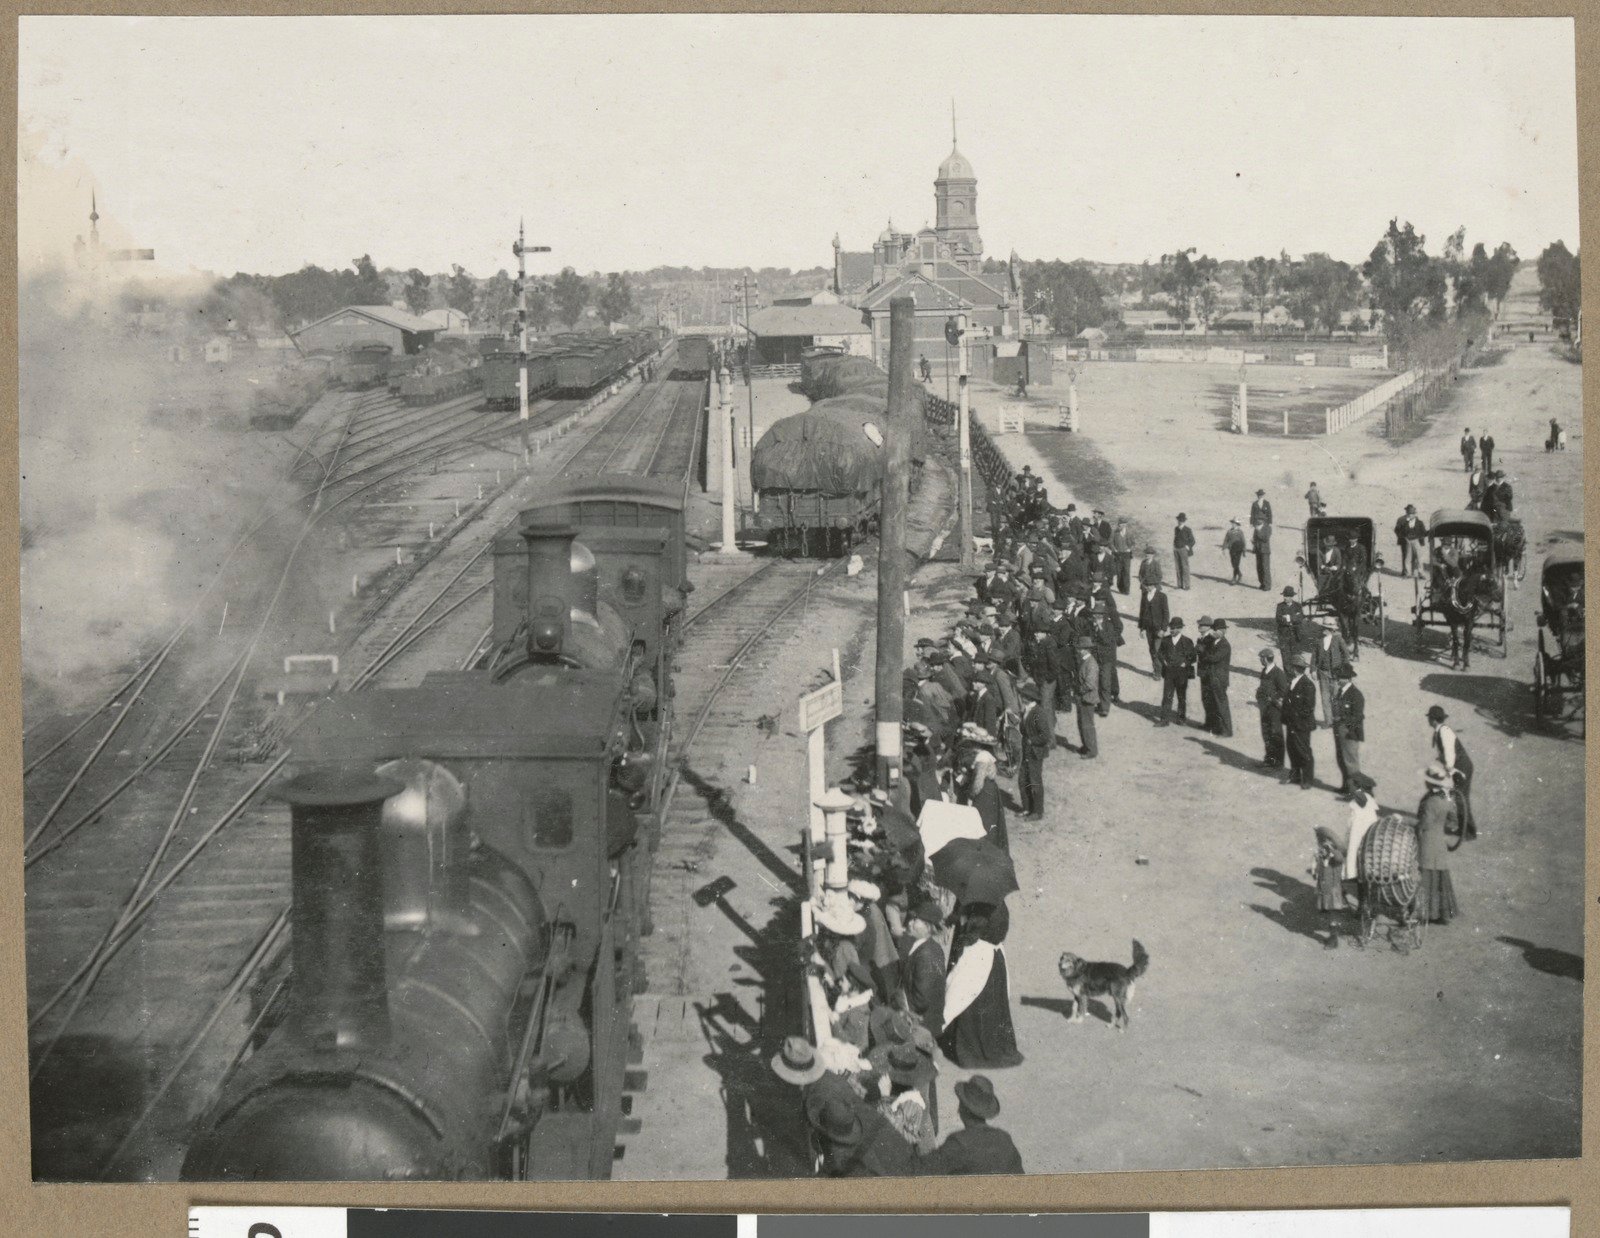 Image of stationary train at Maryborough, with commuters crowded on the platform